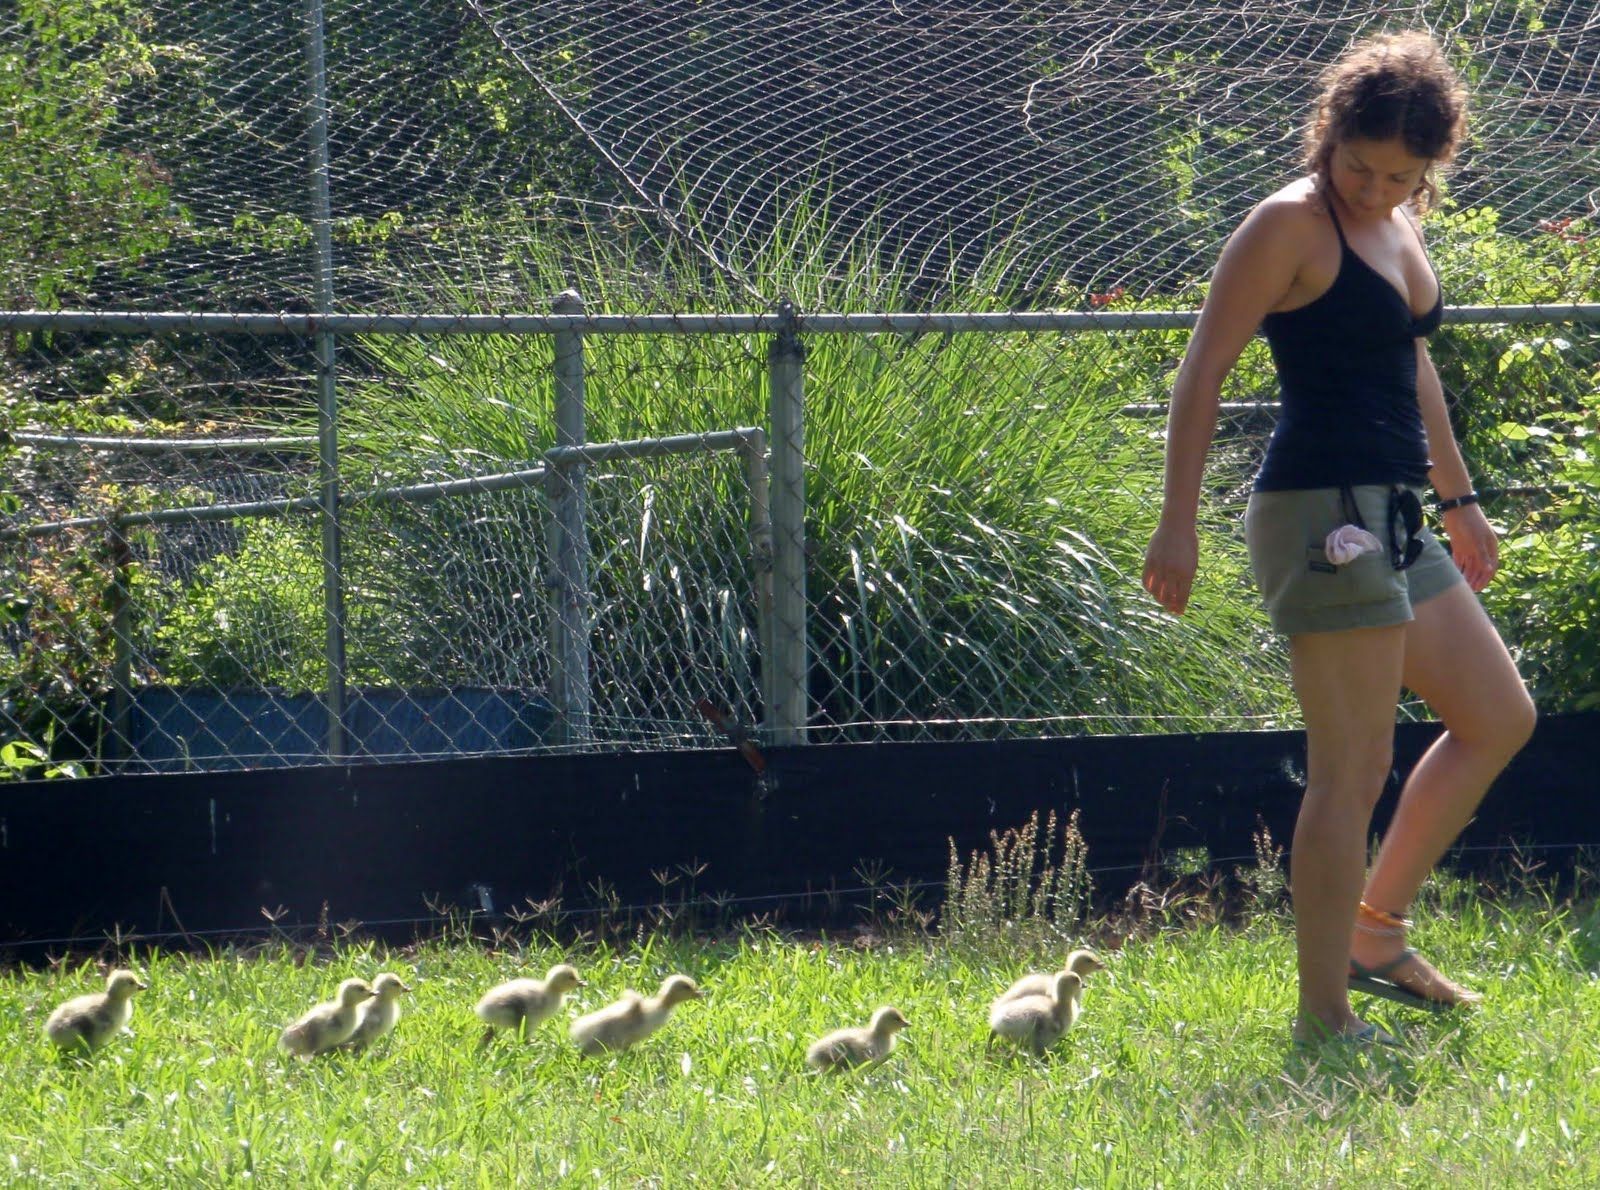 Researcher Jessica Meir is followed by goslings that have imprinted on her.